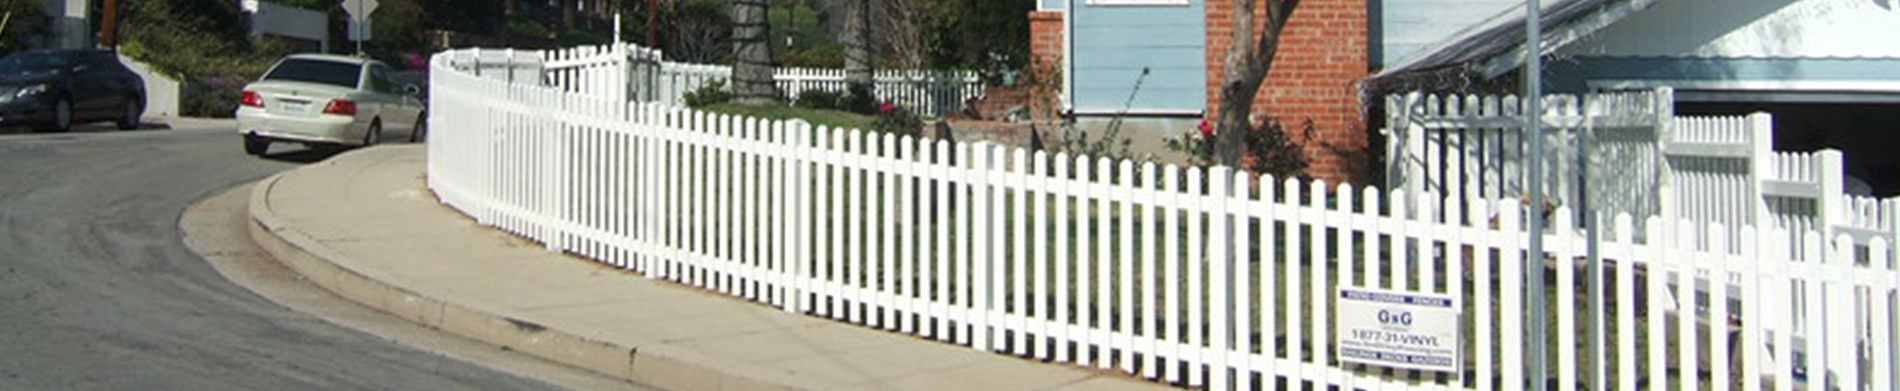 Buy The Best Selling Vinyl Fence For Your Property